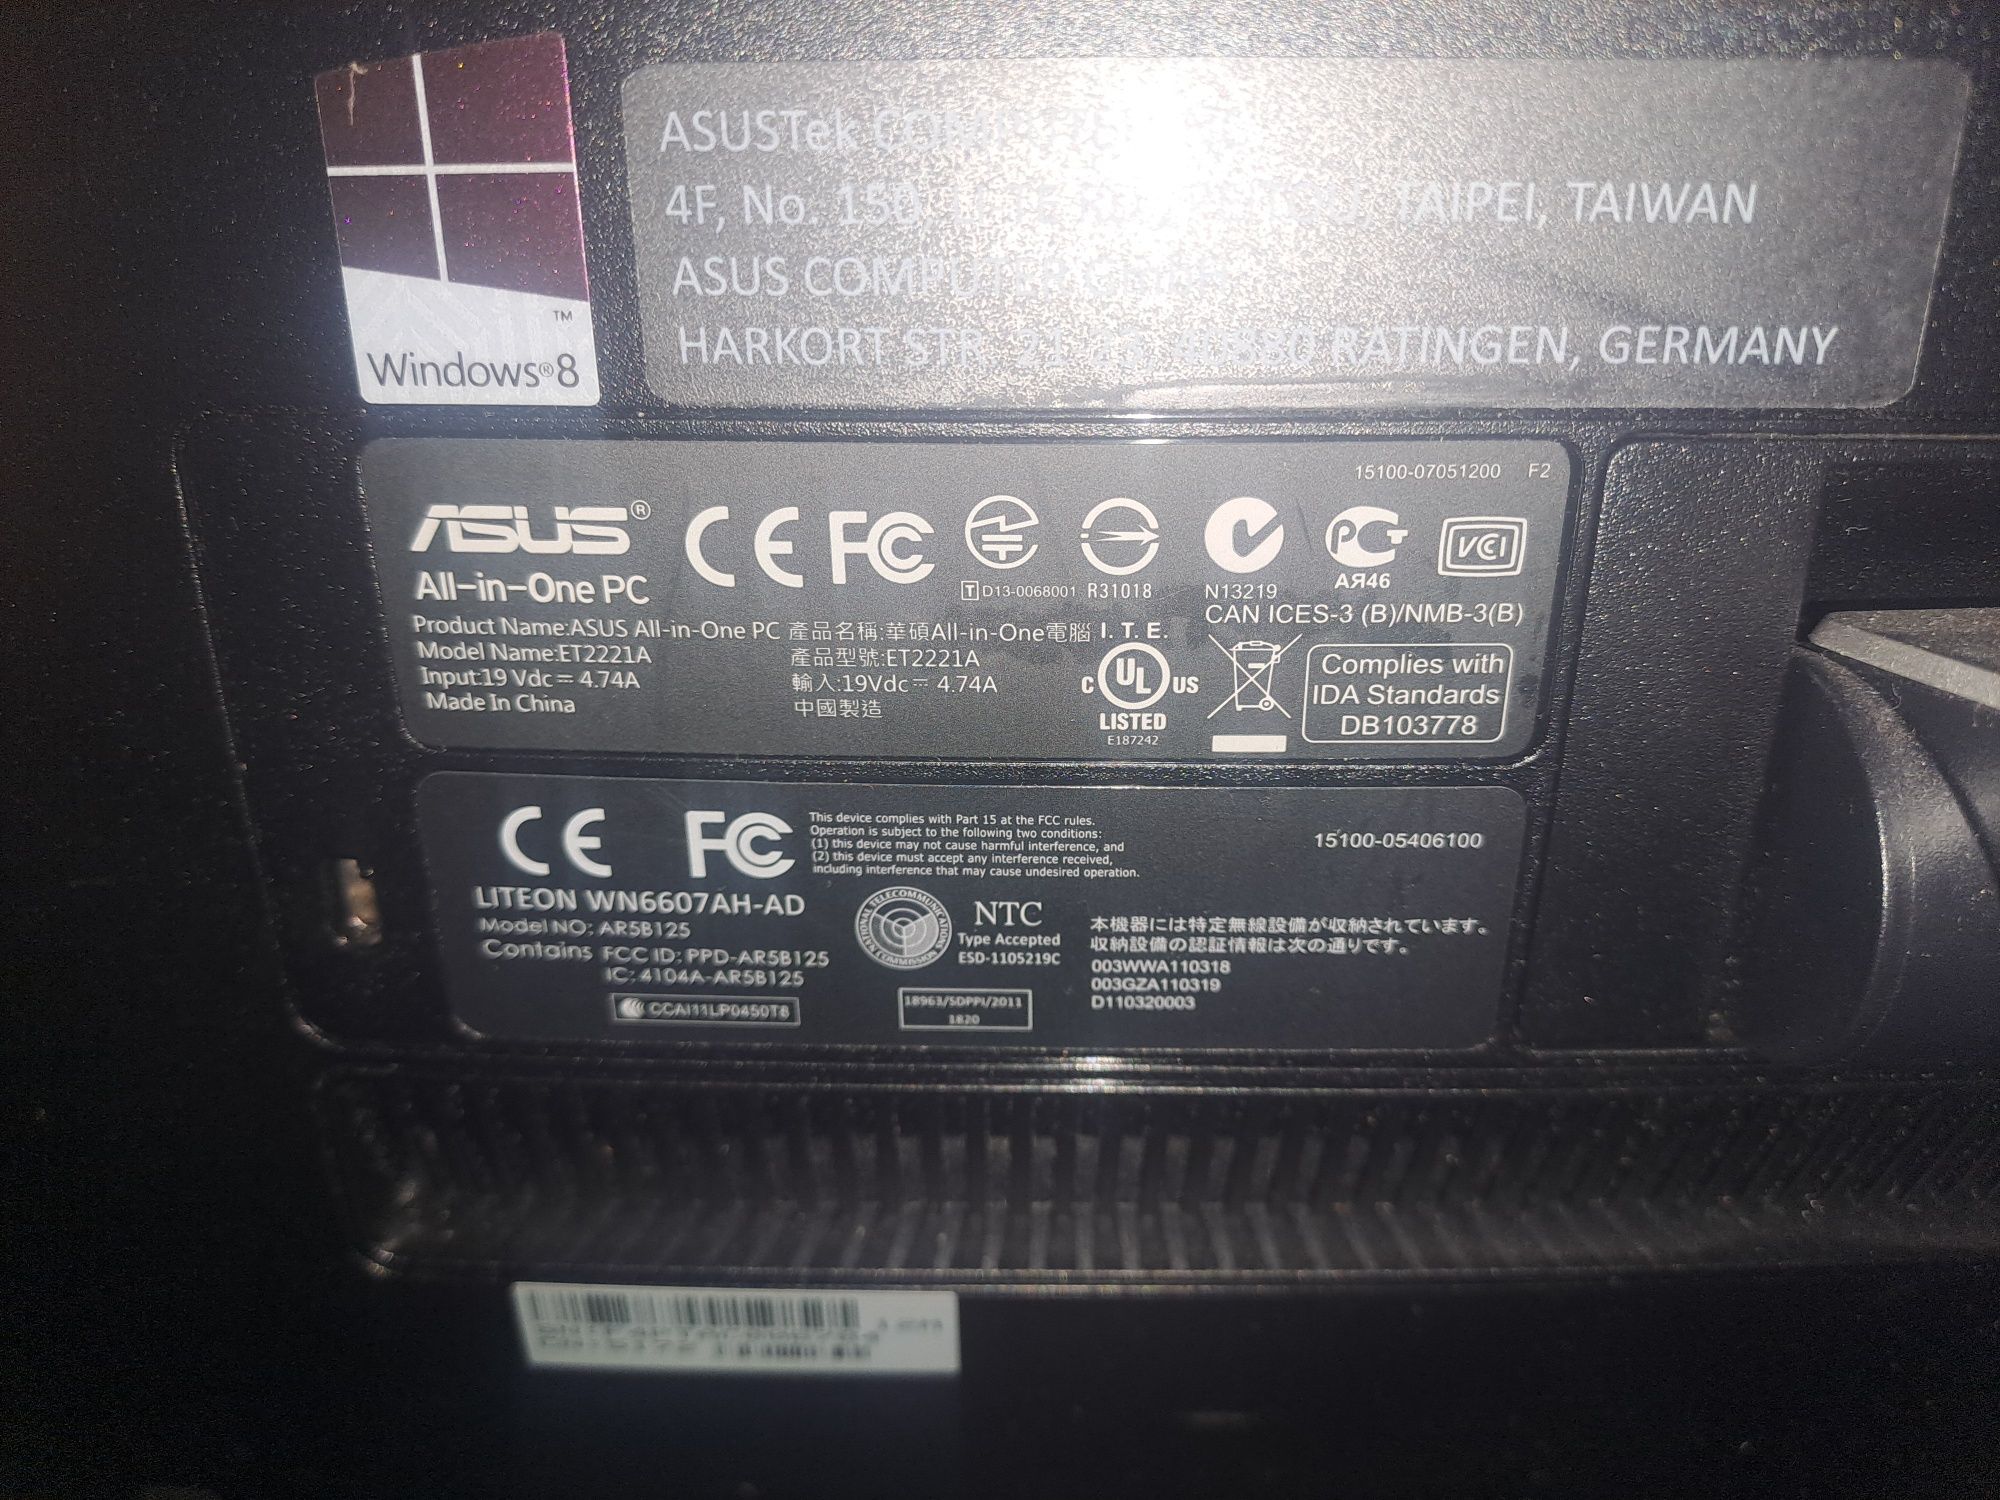 ASUS all in one PC